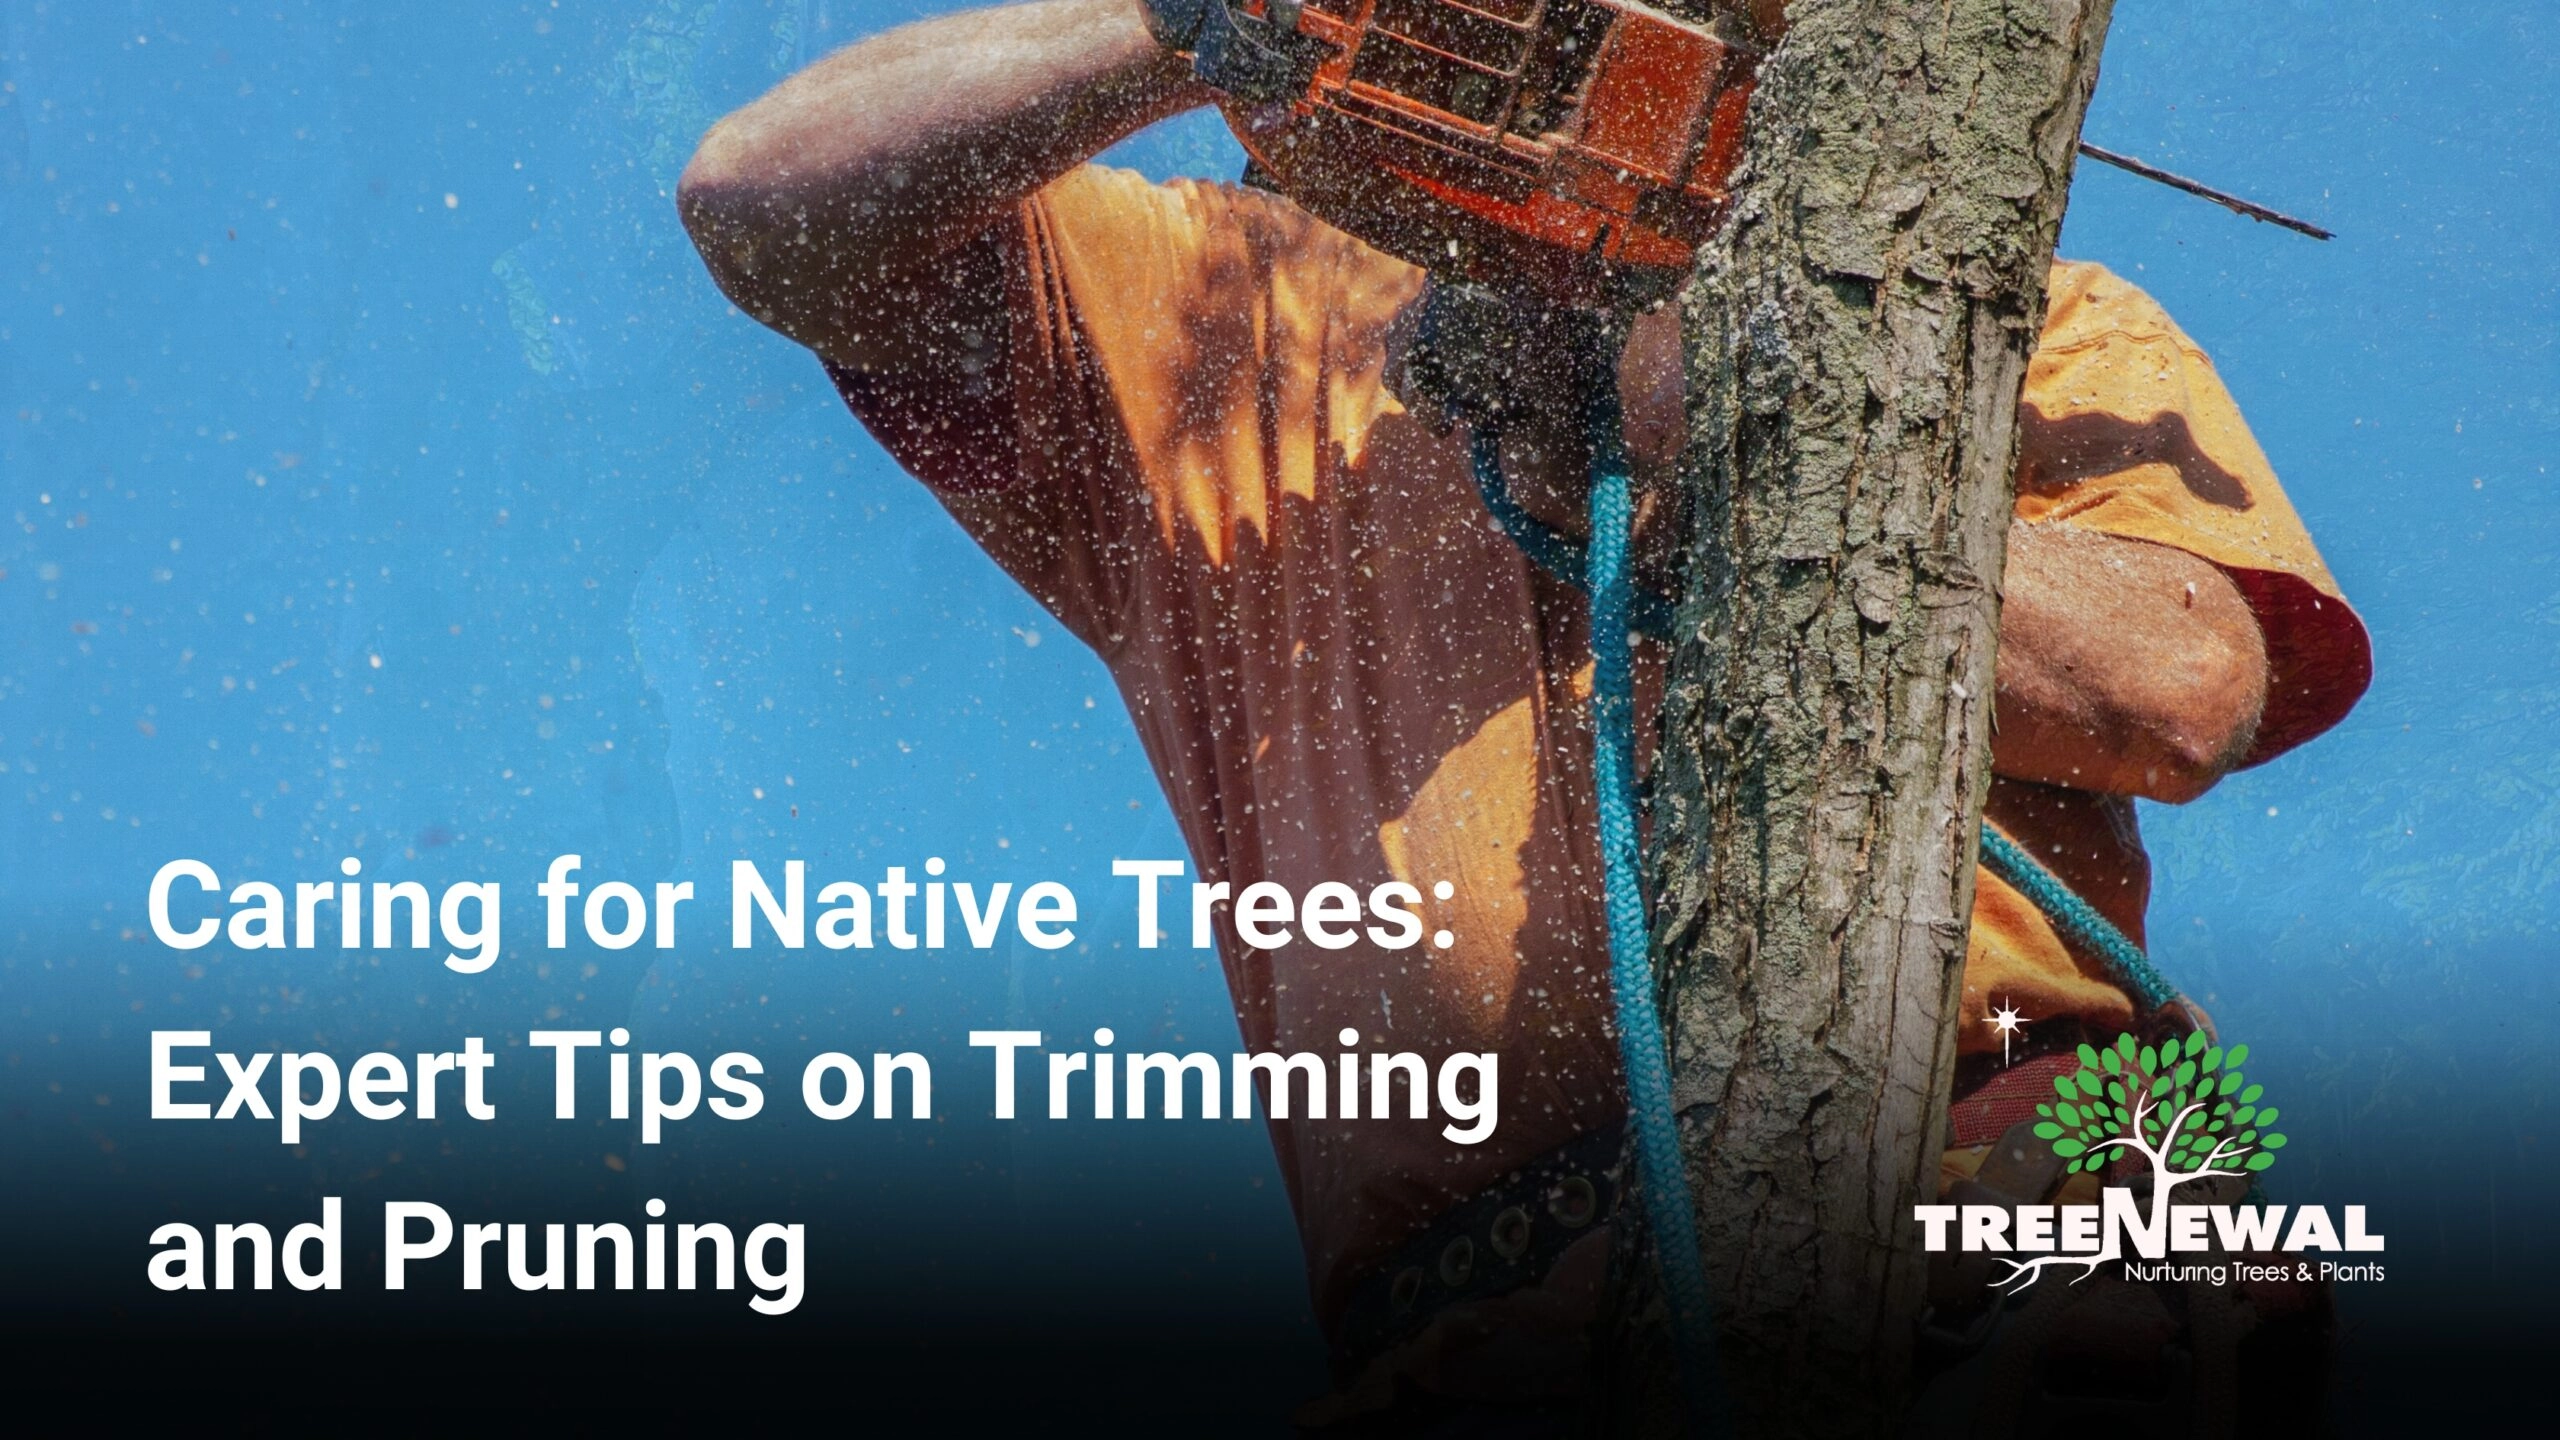 Caring for Native Trees: Expert Tips on Trimming and Pruning